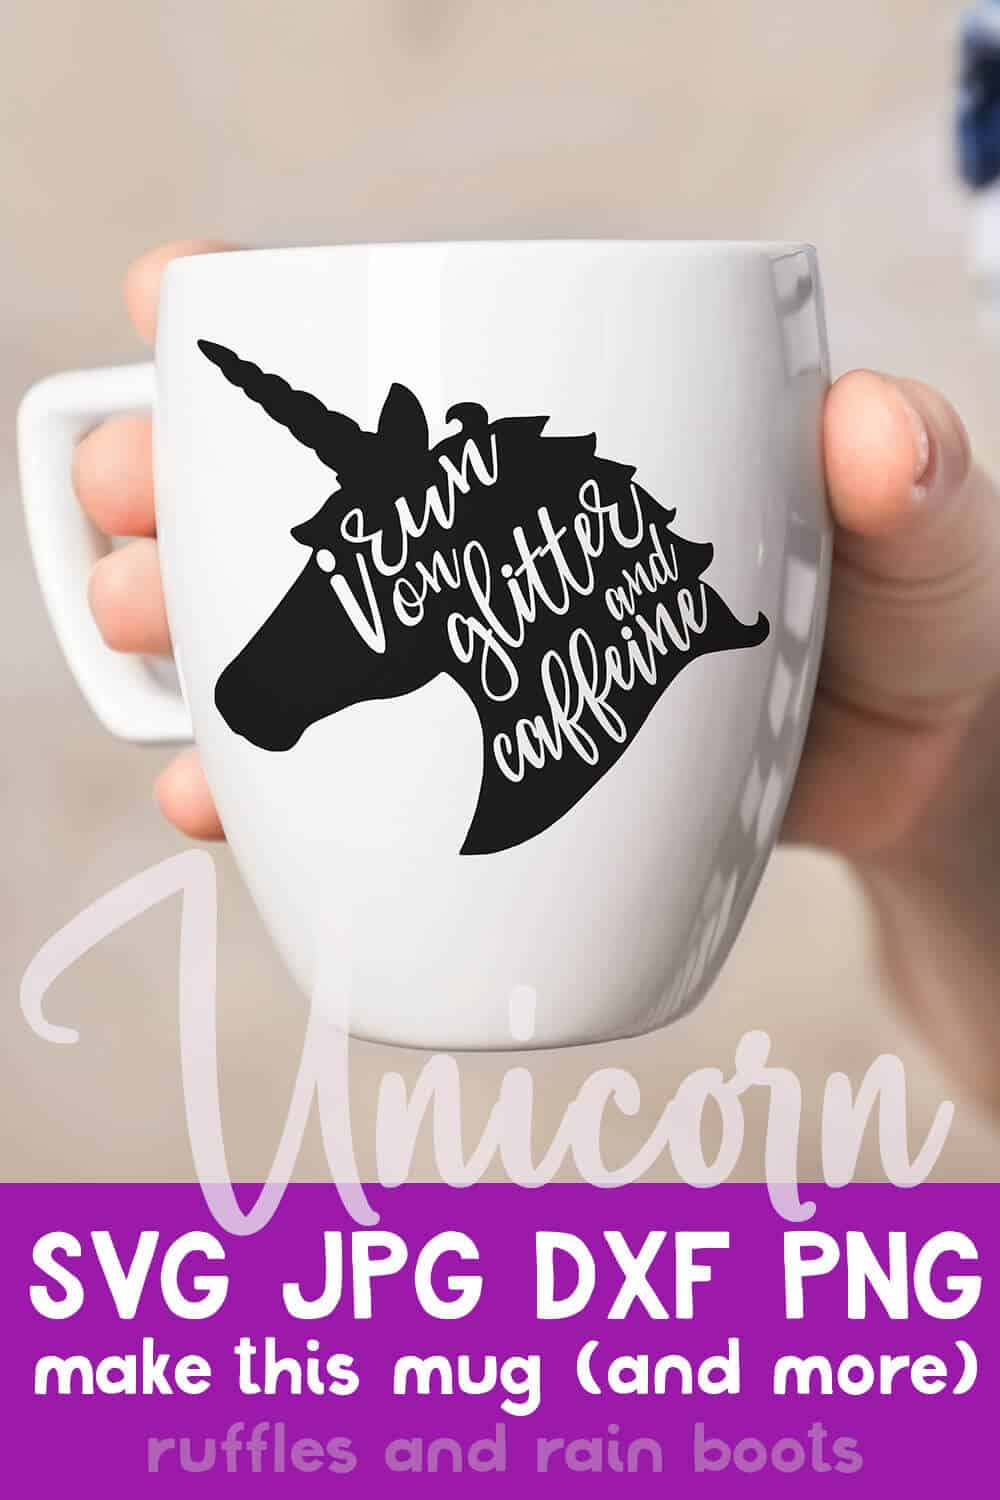 white mug in a woman's hand with a diy unicorn svg for silhouette that reads I run on glitter and caffeine on a beige background with text which reads unicorn svg jpg dxf pgn make this mug (and more)